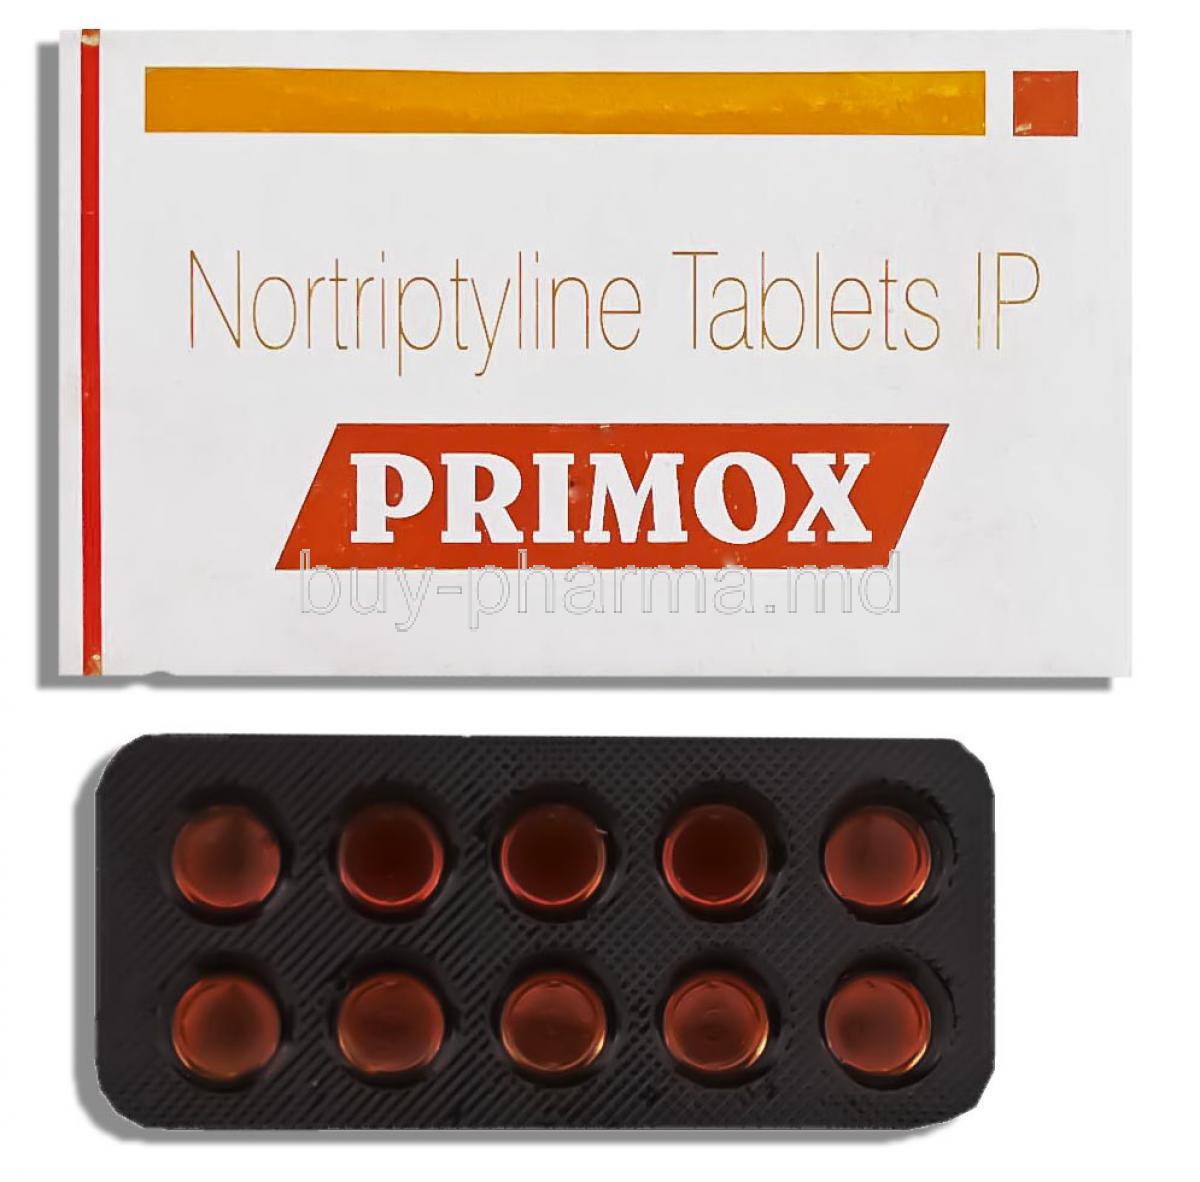 Primox, Generic Pamelor, Nortriptyline?25 Mg Tablet (Wallace Pharma)